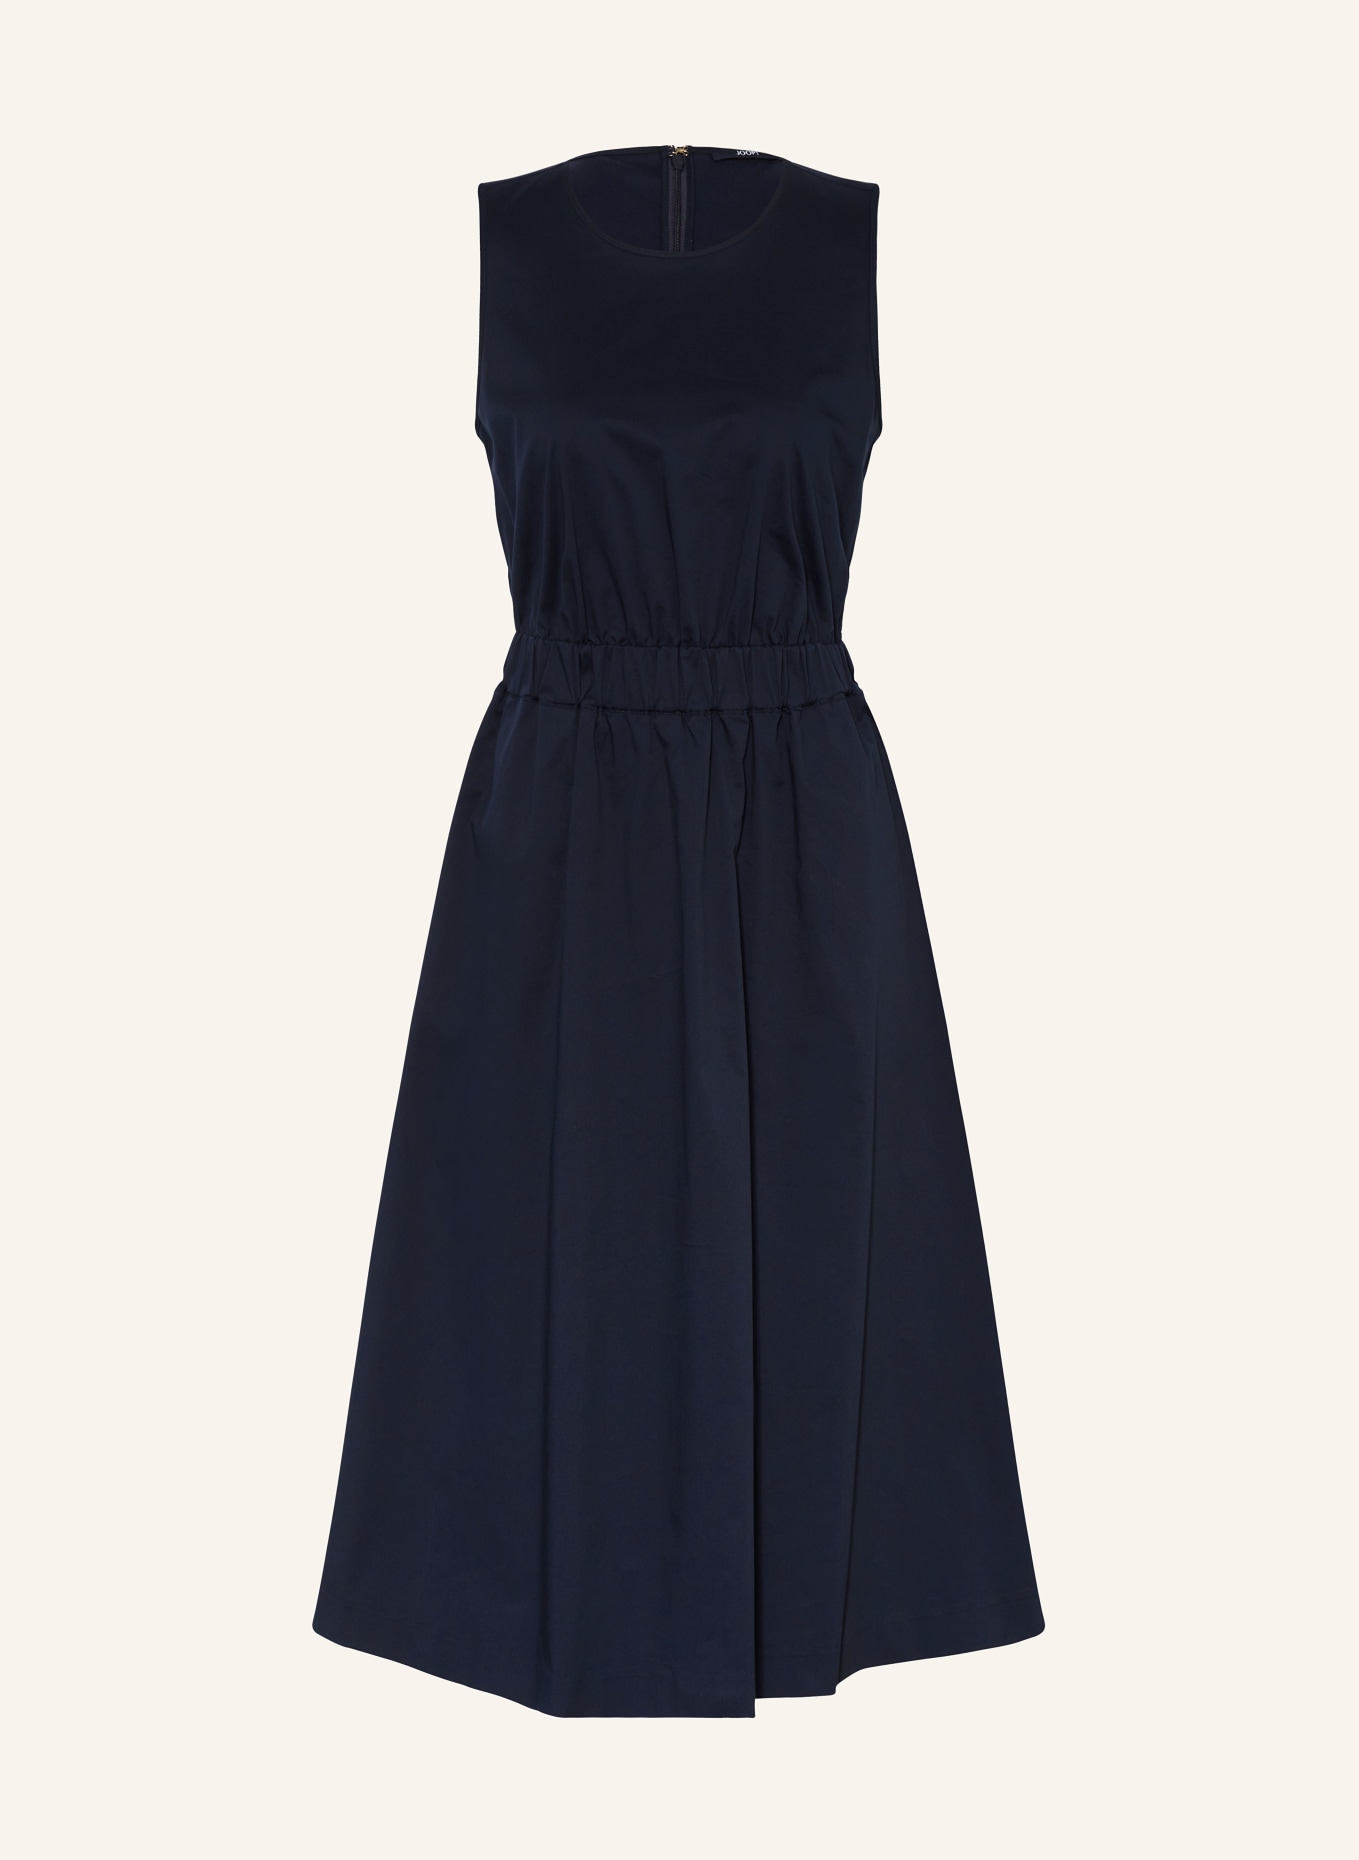 JOOP! Dress with cut-out, Color: DARK BLUE (Image 1)